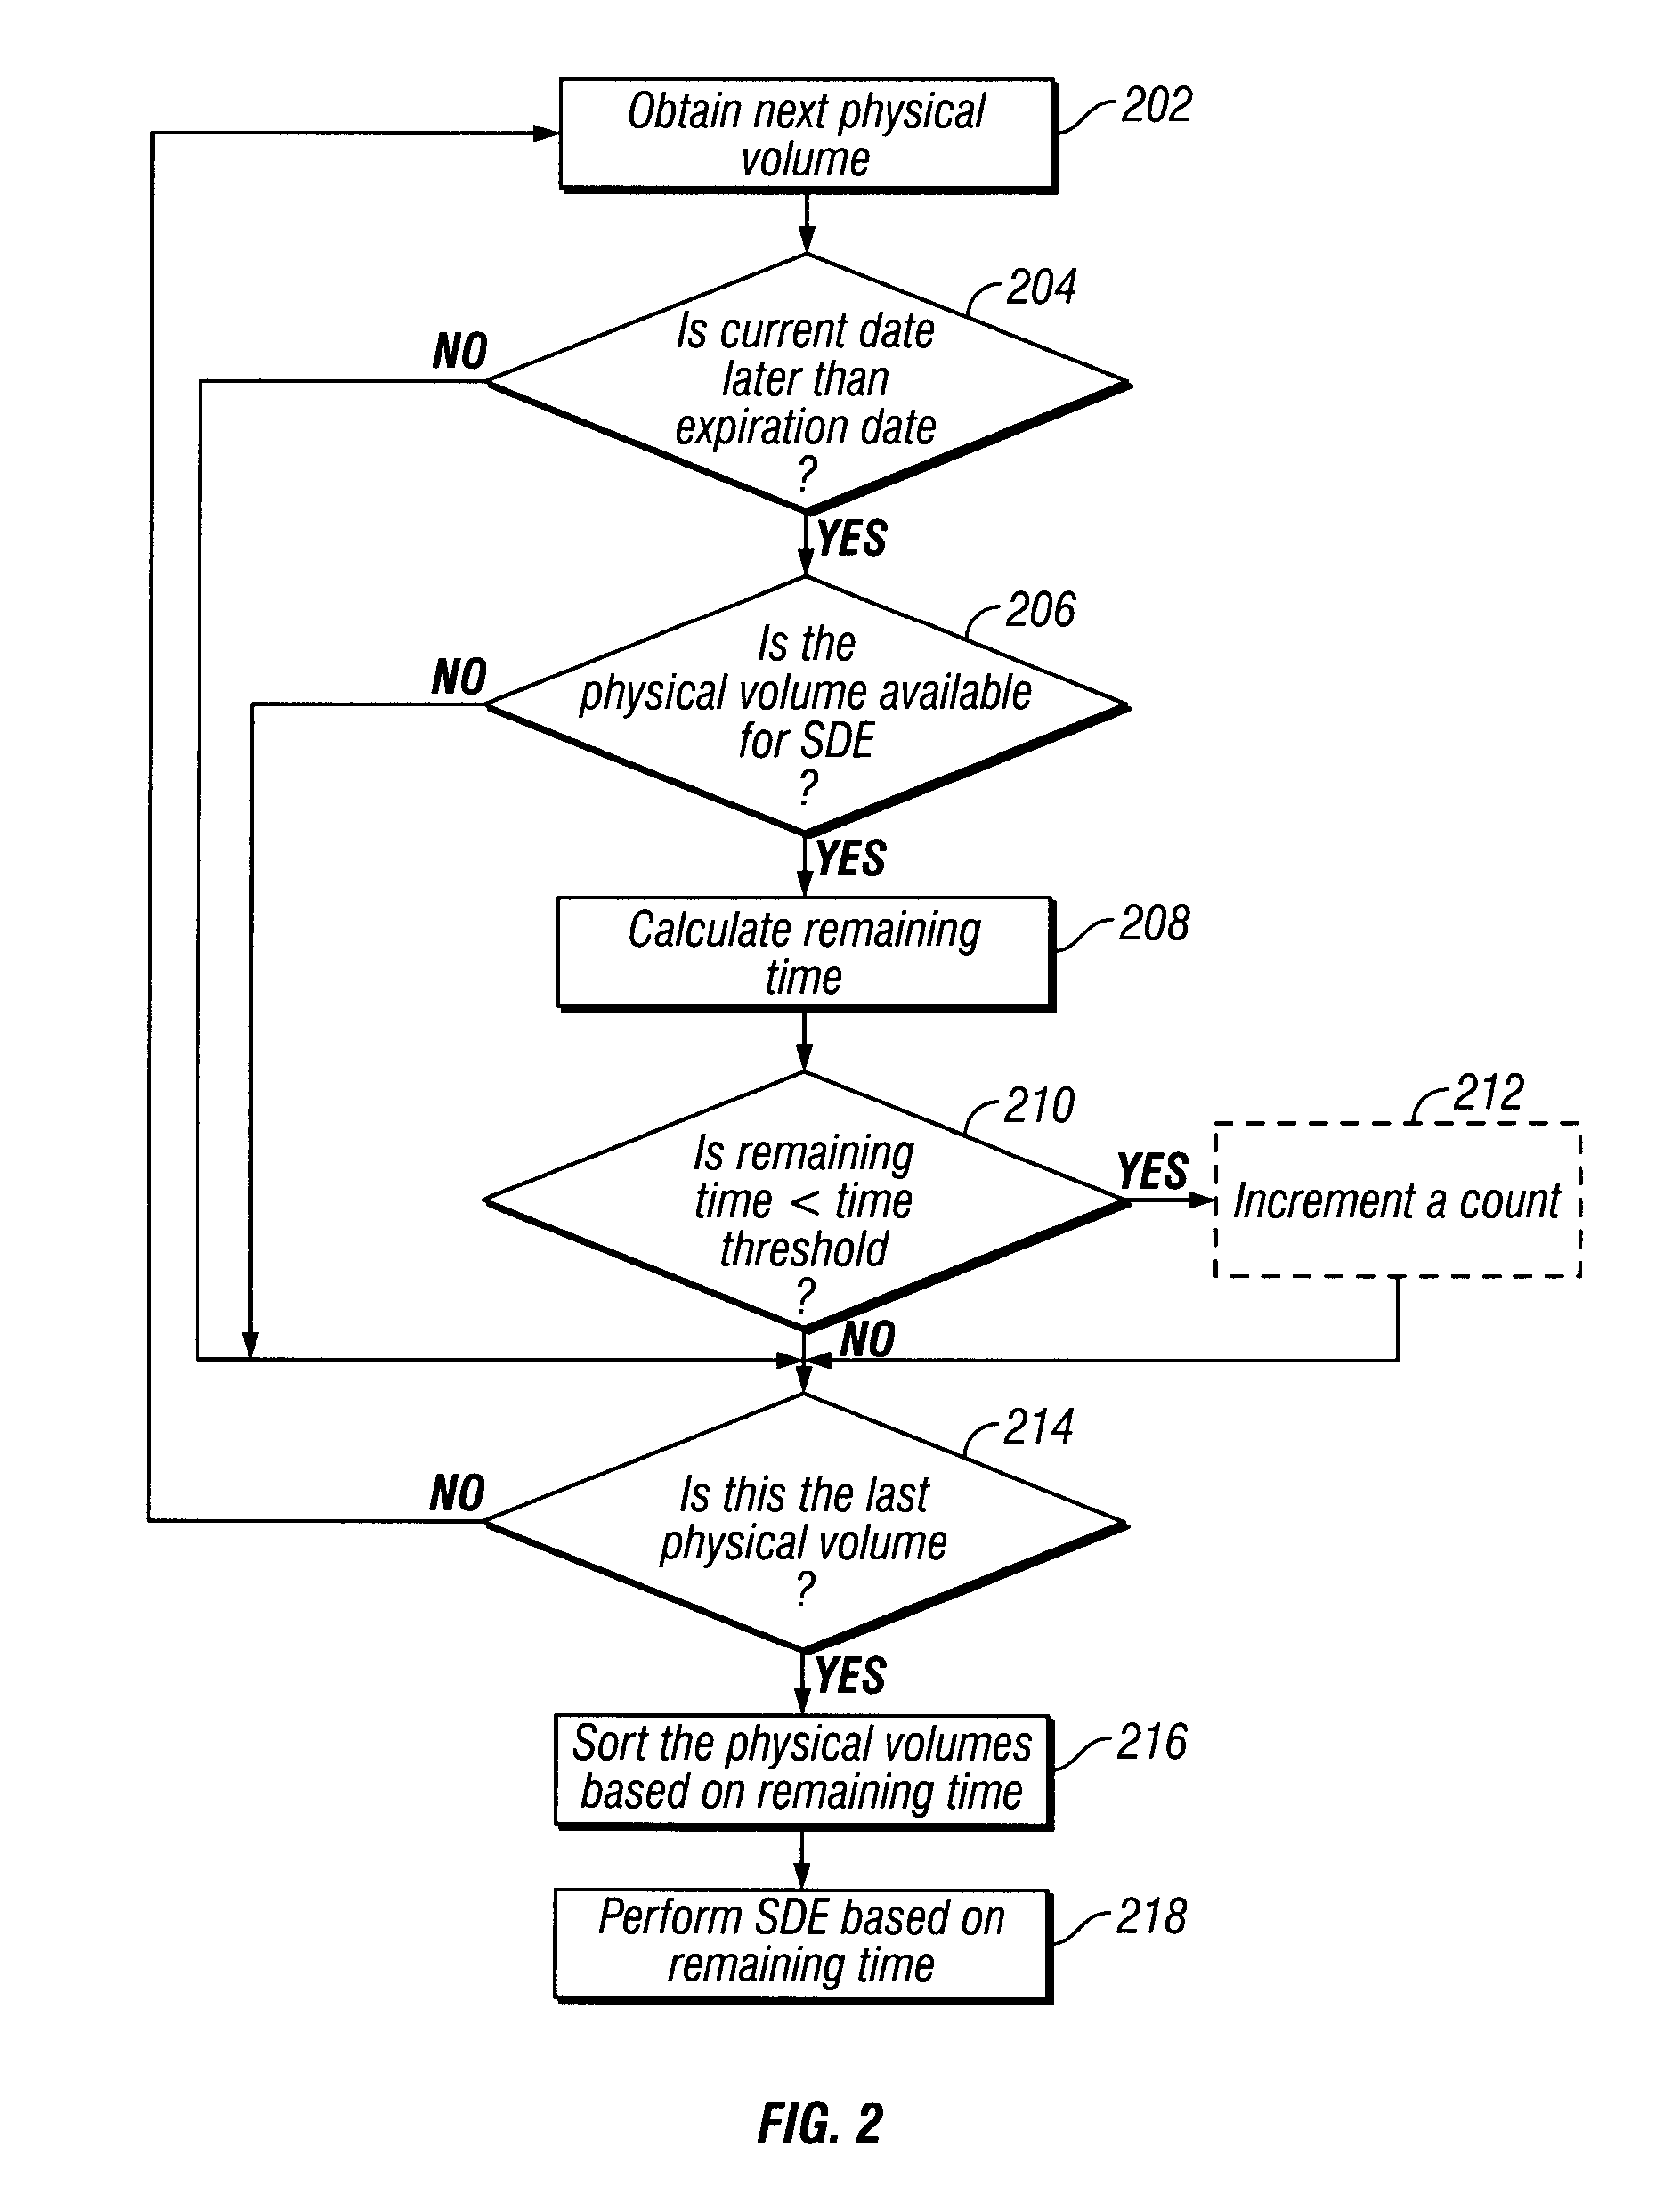 System for Determining Allocation of Tape Drive Resources for a Secure Data Erase Process